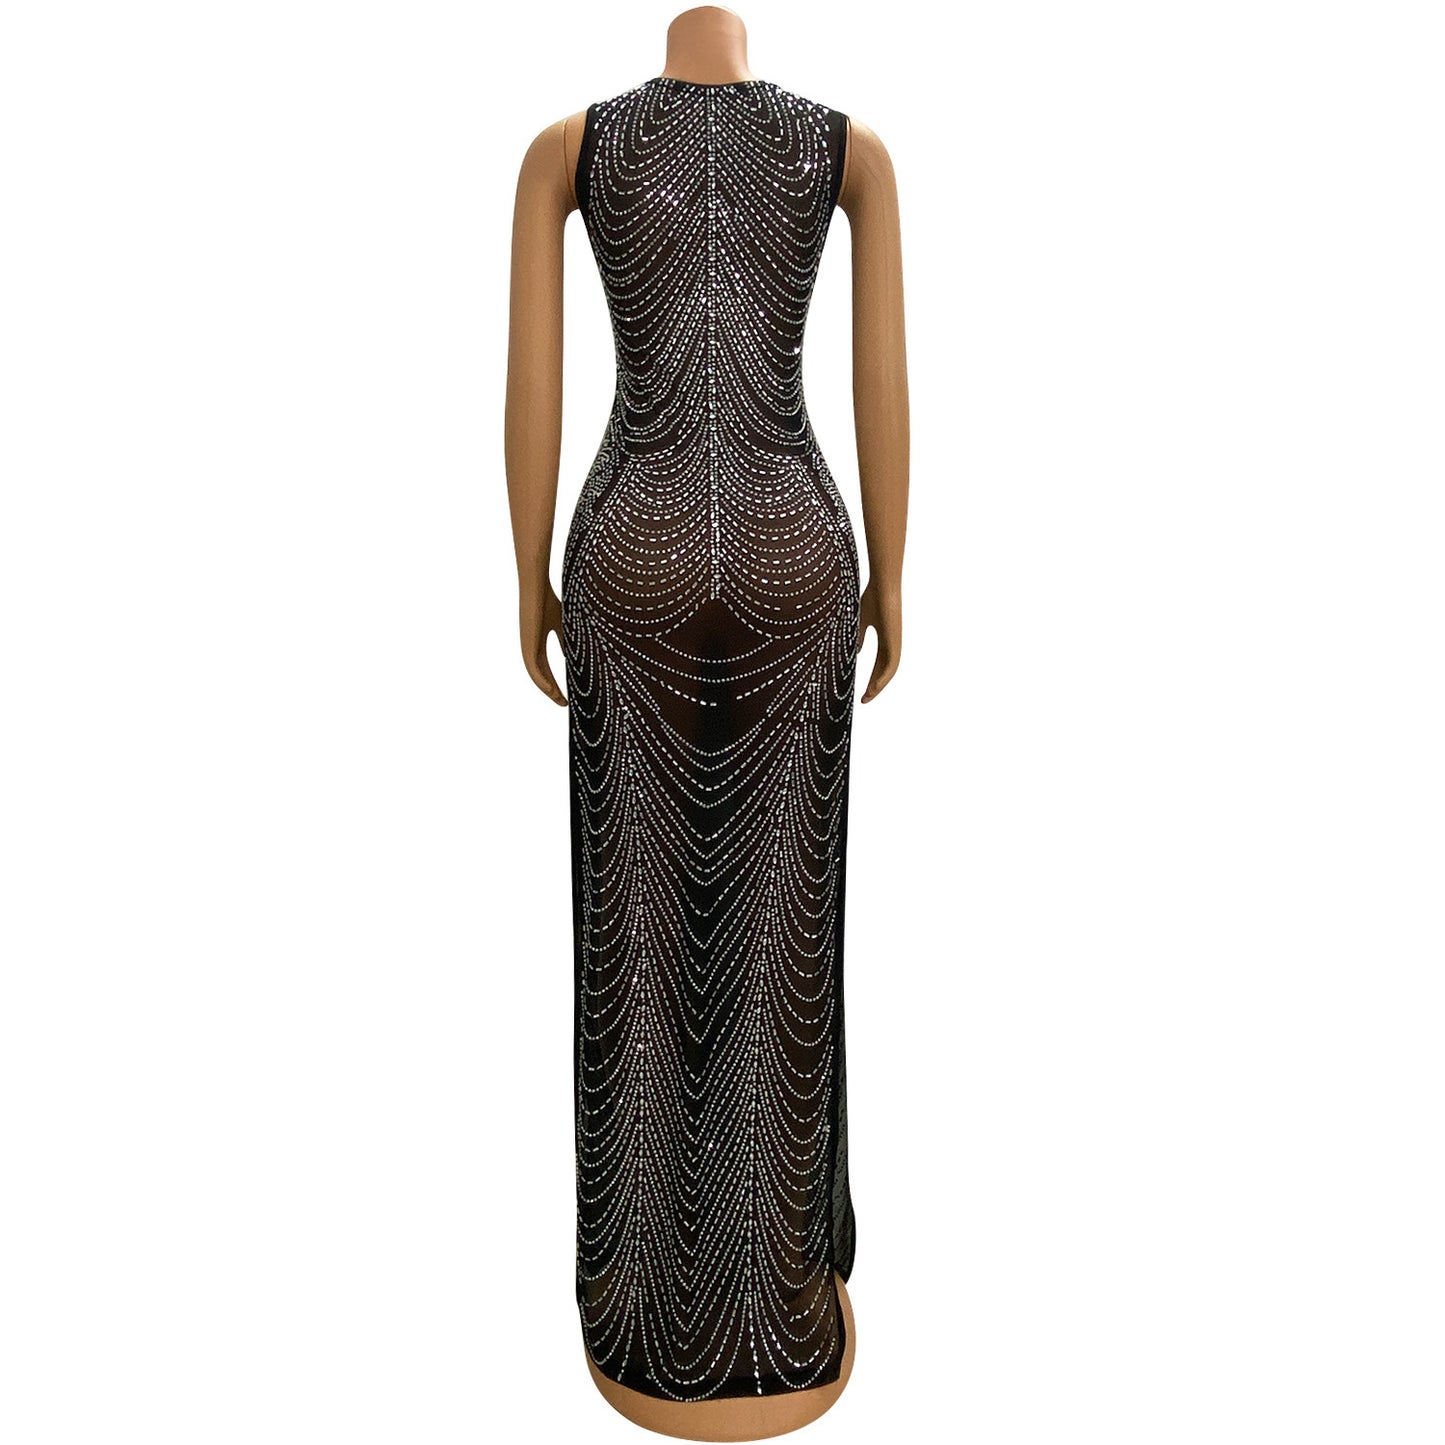 BamBam Autumn and Winter Women's Sexy See-Through Evening Beaded Nightclub Dress for Women - BamBam Clothing Clothing